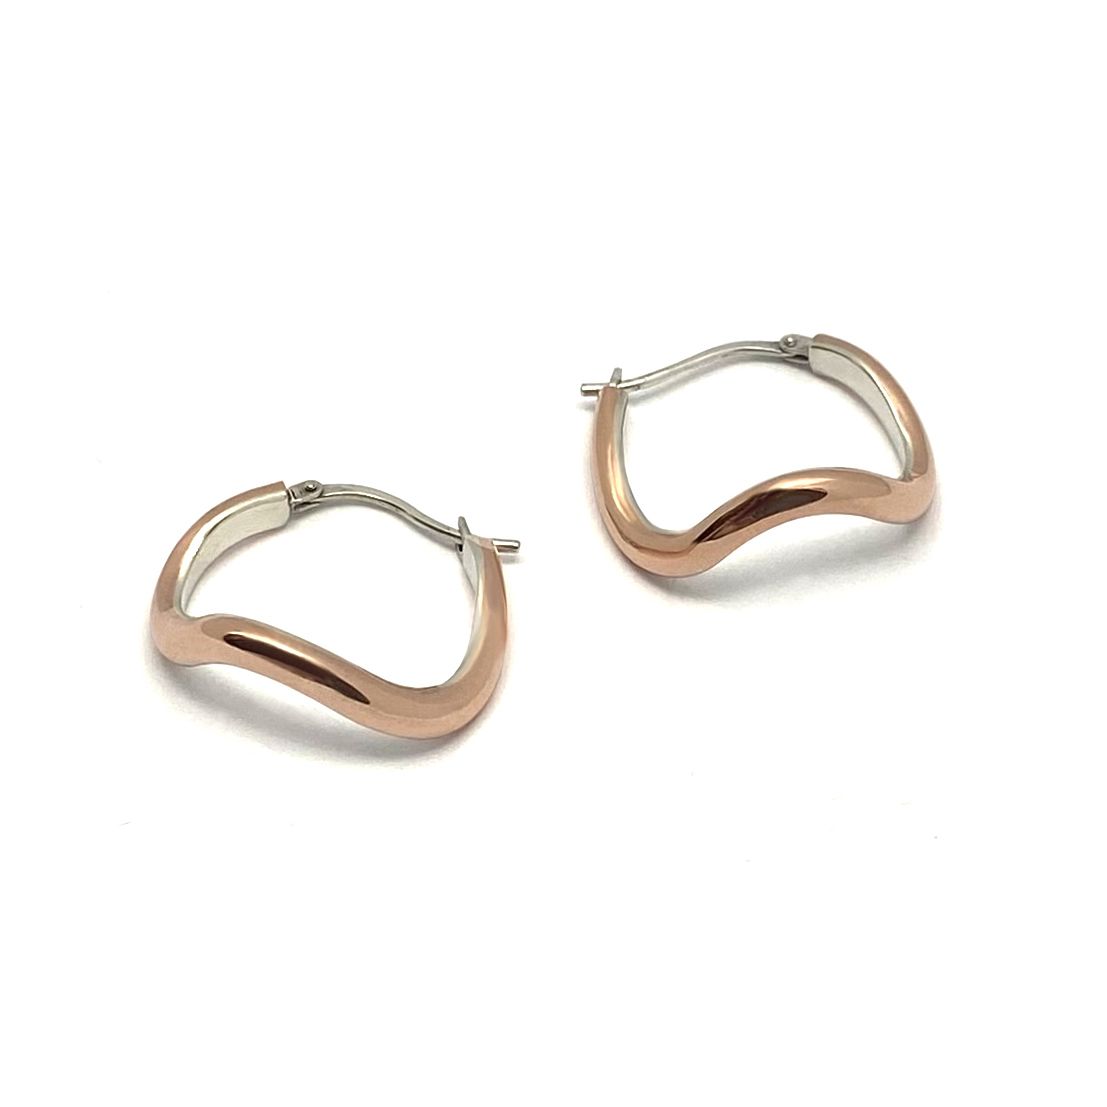 Claudine Moncion: Hoop Earrings Copper&Silver Product Image 1 of 1